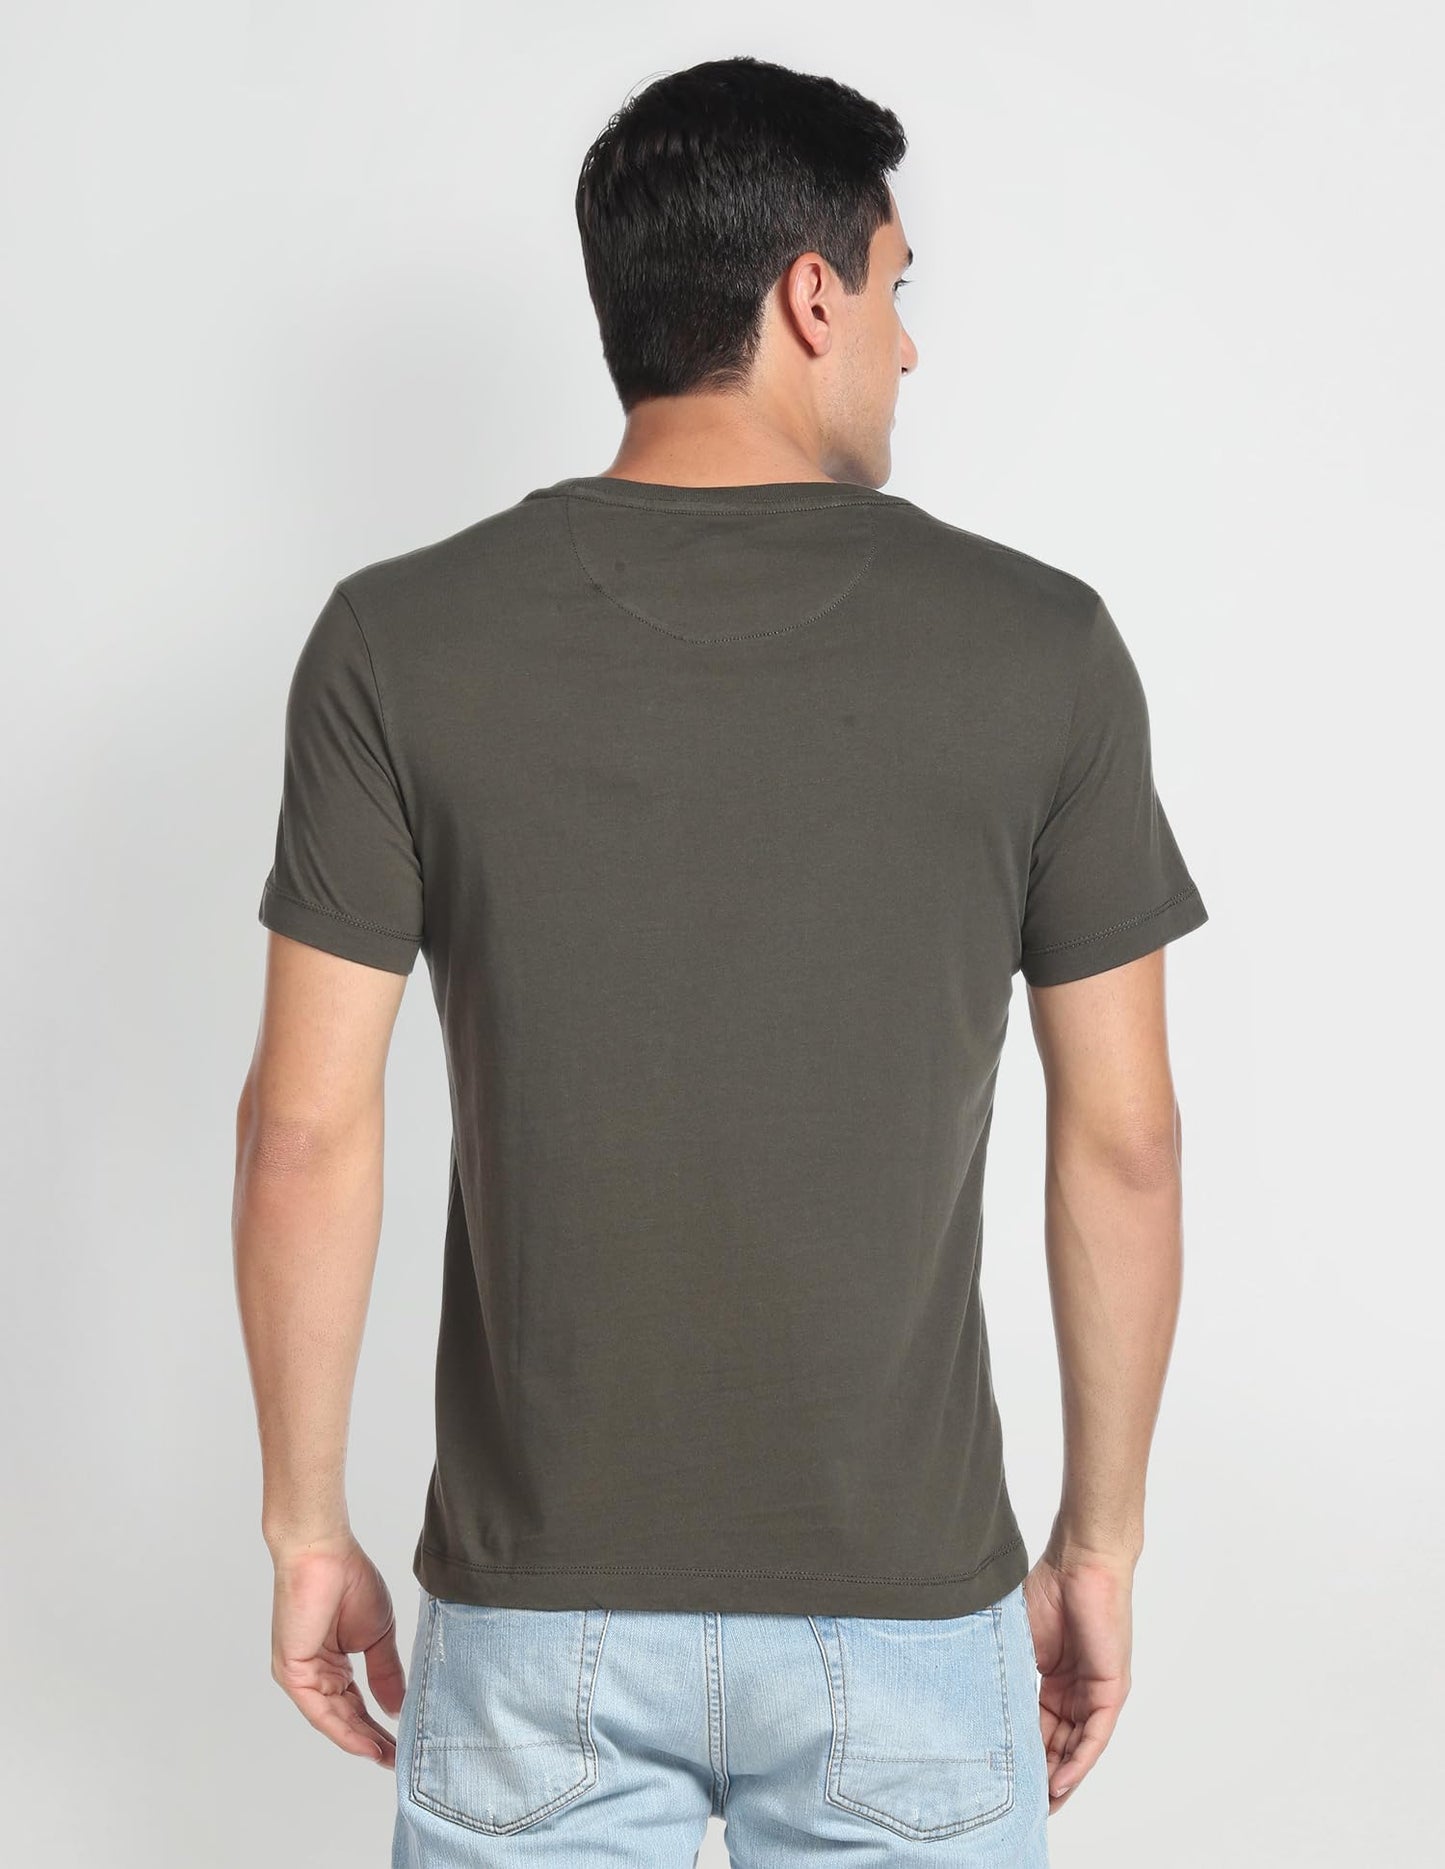 U.S. POLO ASSN. Mens Muscle FIT Half Sleeve Round Neck T-Shirts (UDTSHS0416_Olive_L)